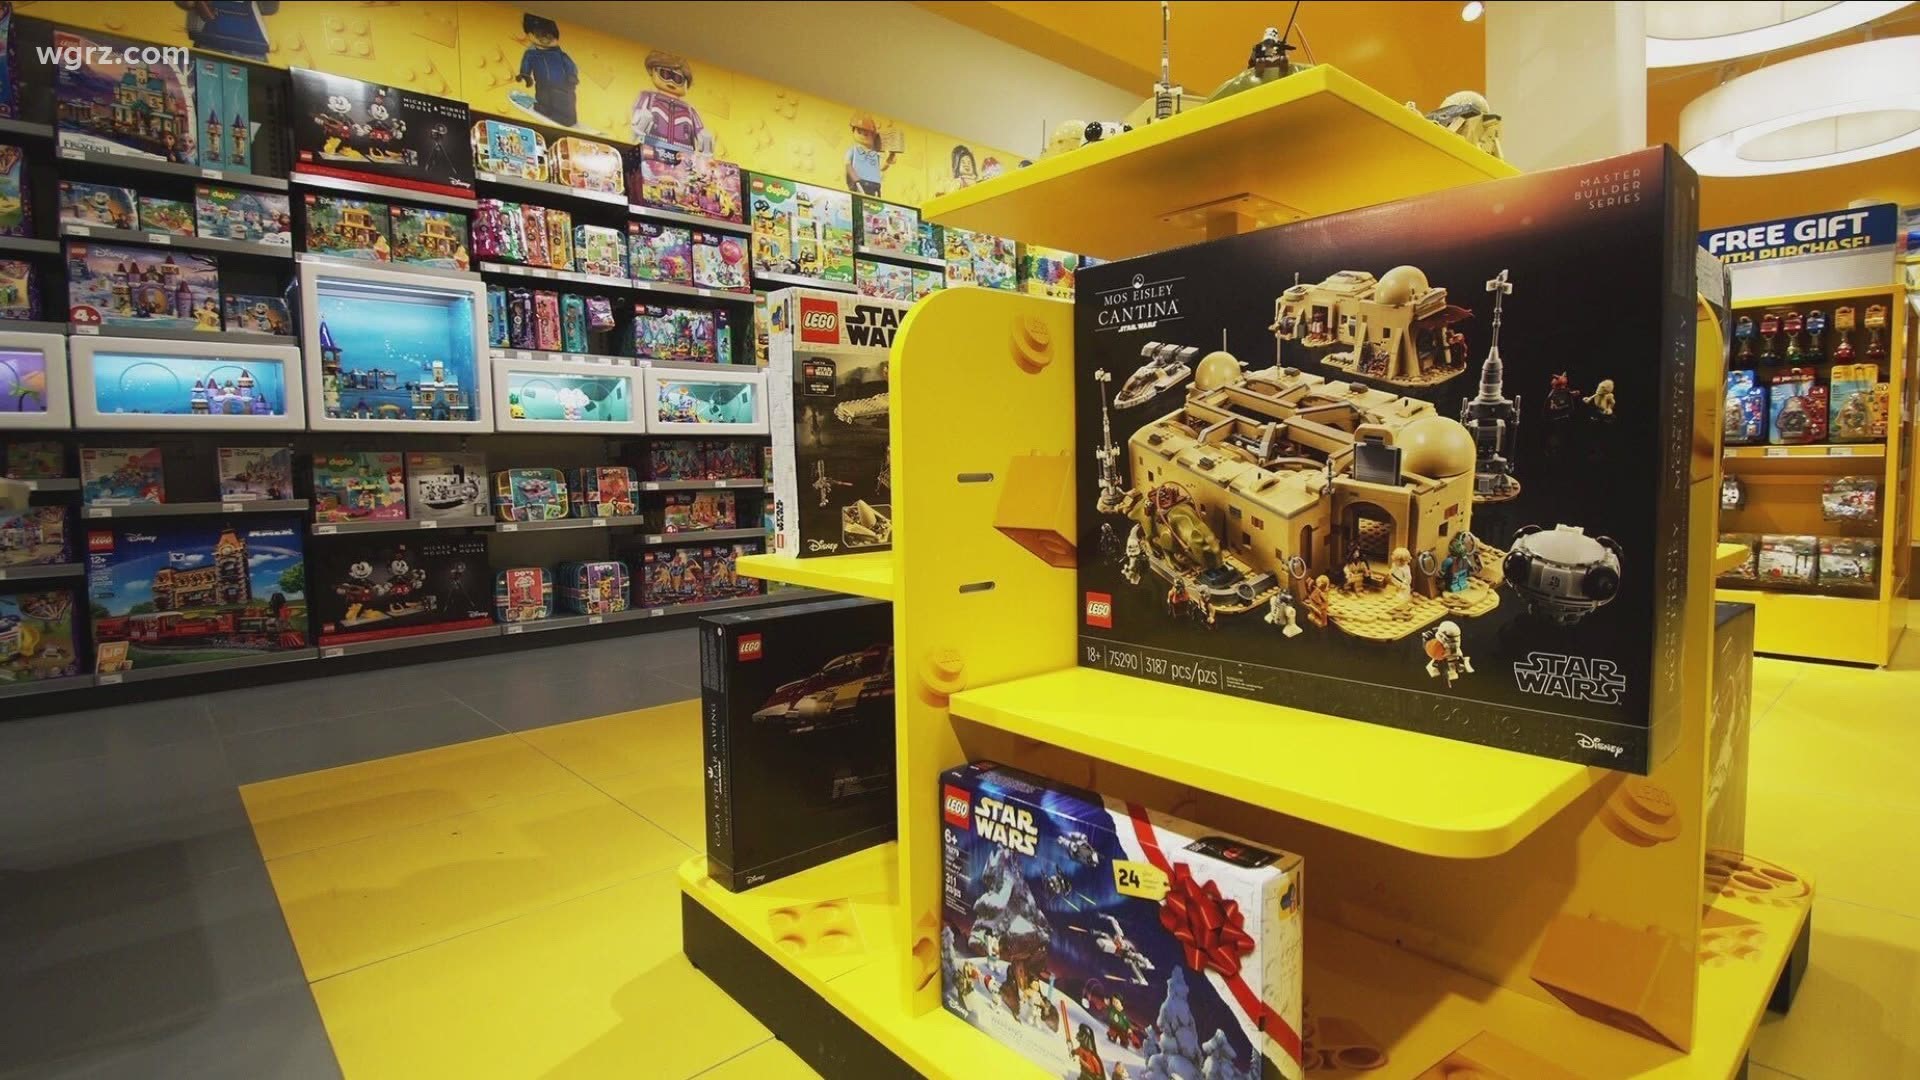 The store will eventually feature hands-on activities for LEGO fans of all ages.